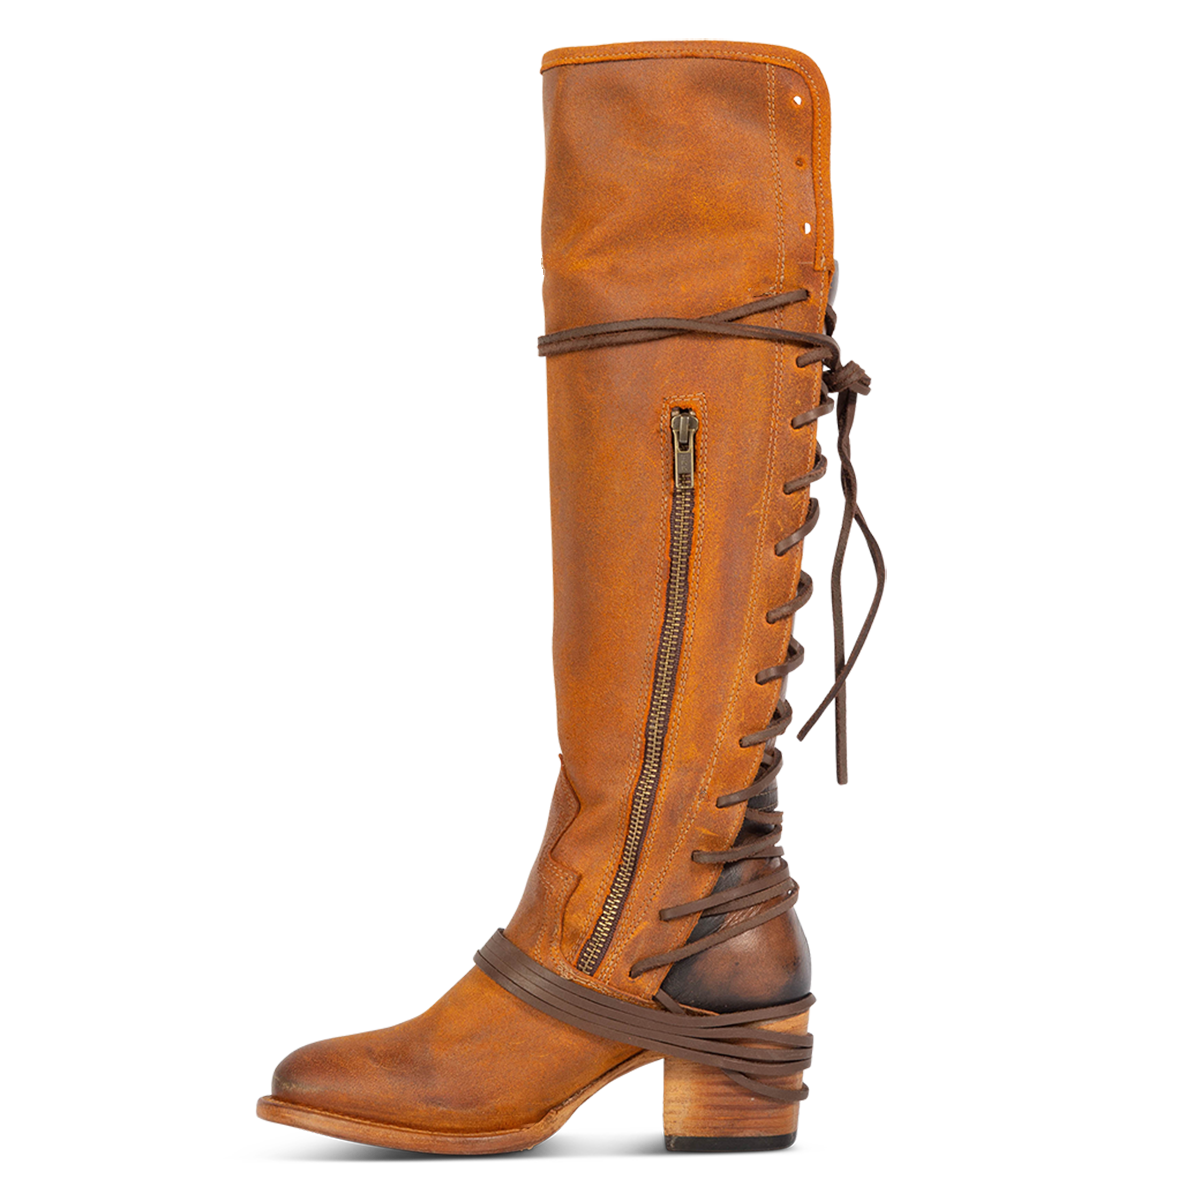 Inside view showing working brass zip closure and adjustable wrap around laces on FREEBIRD women's Coal tan suede tall boot